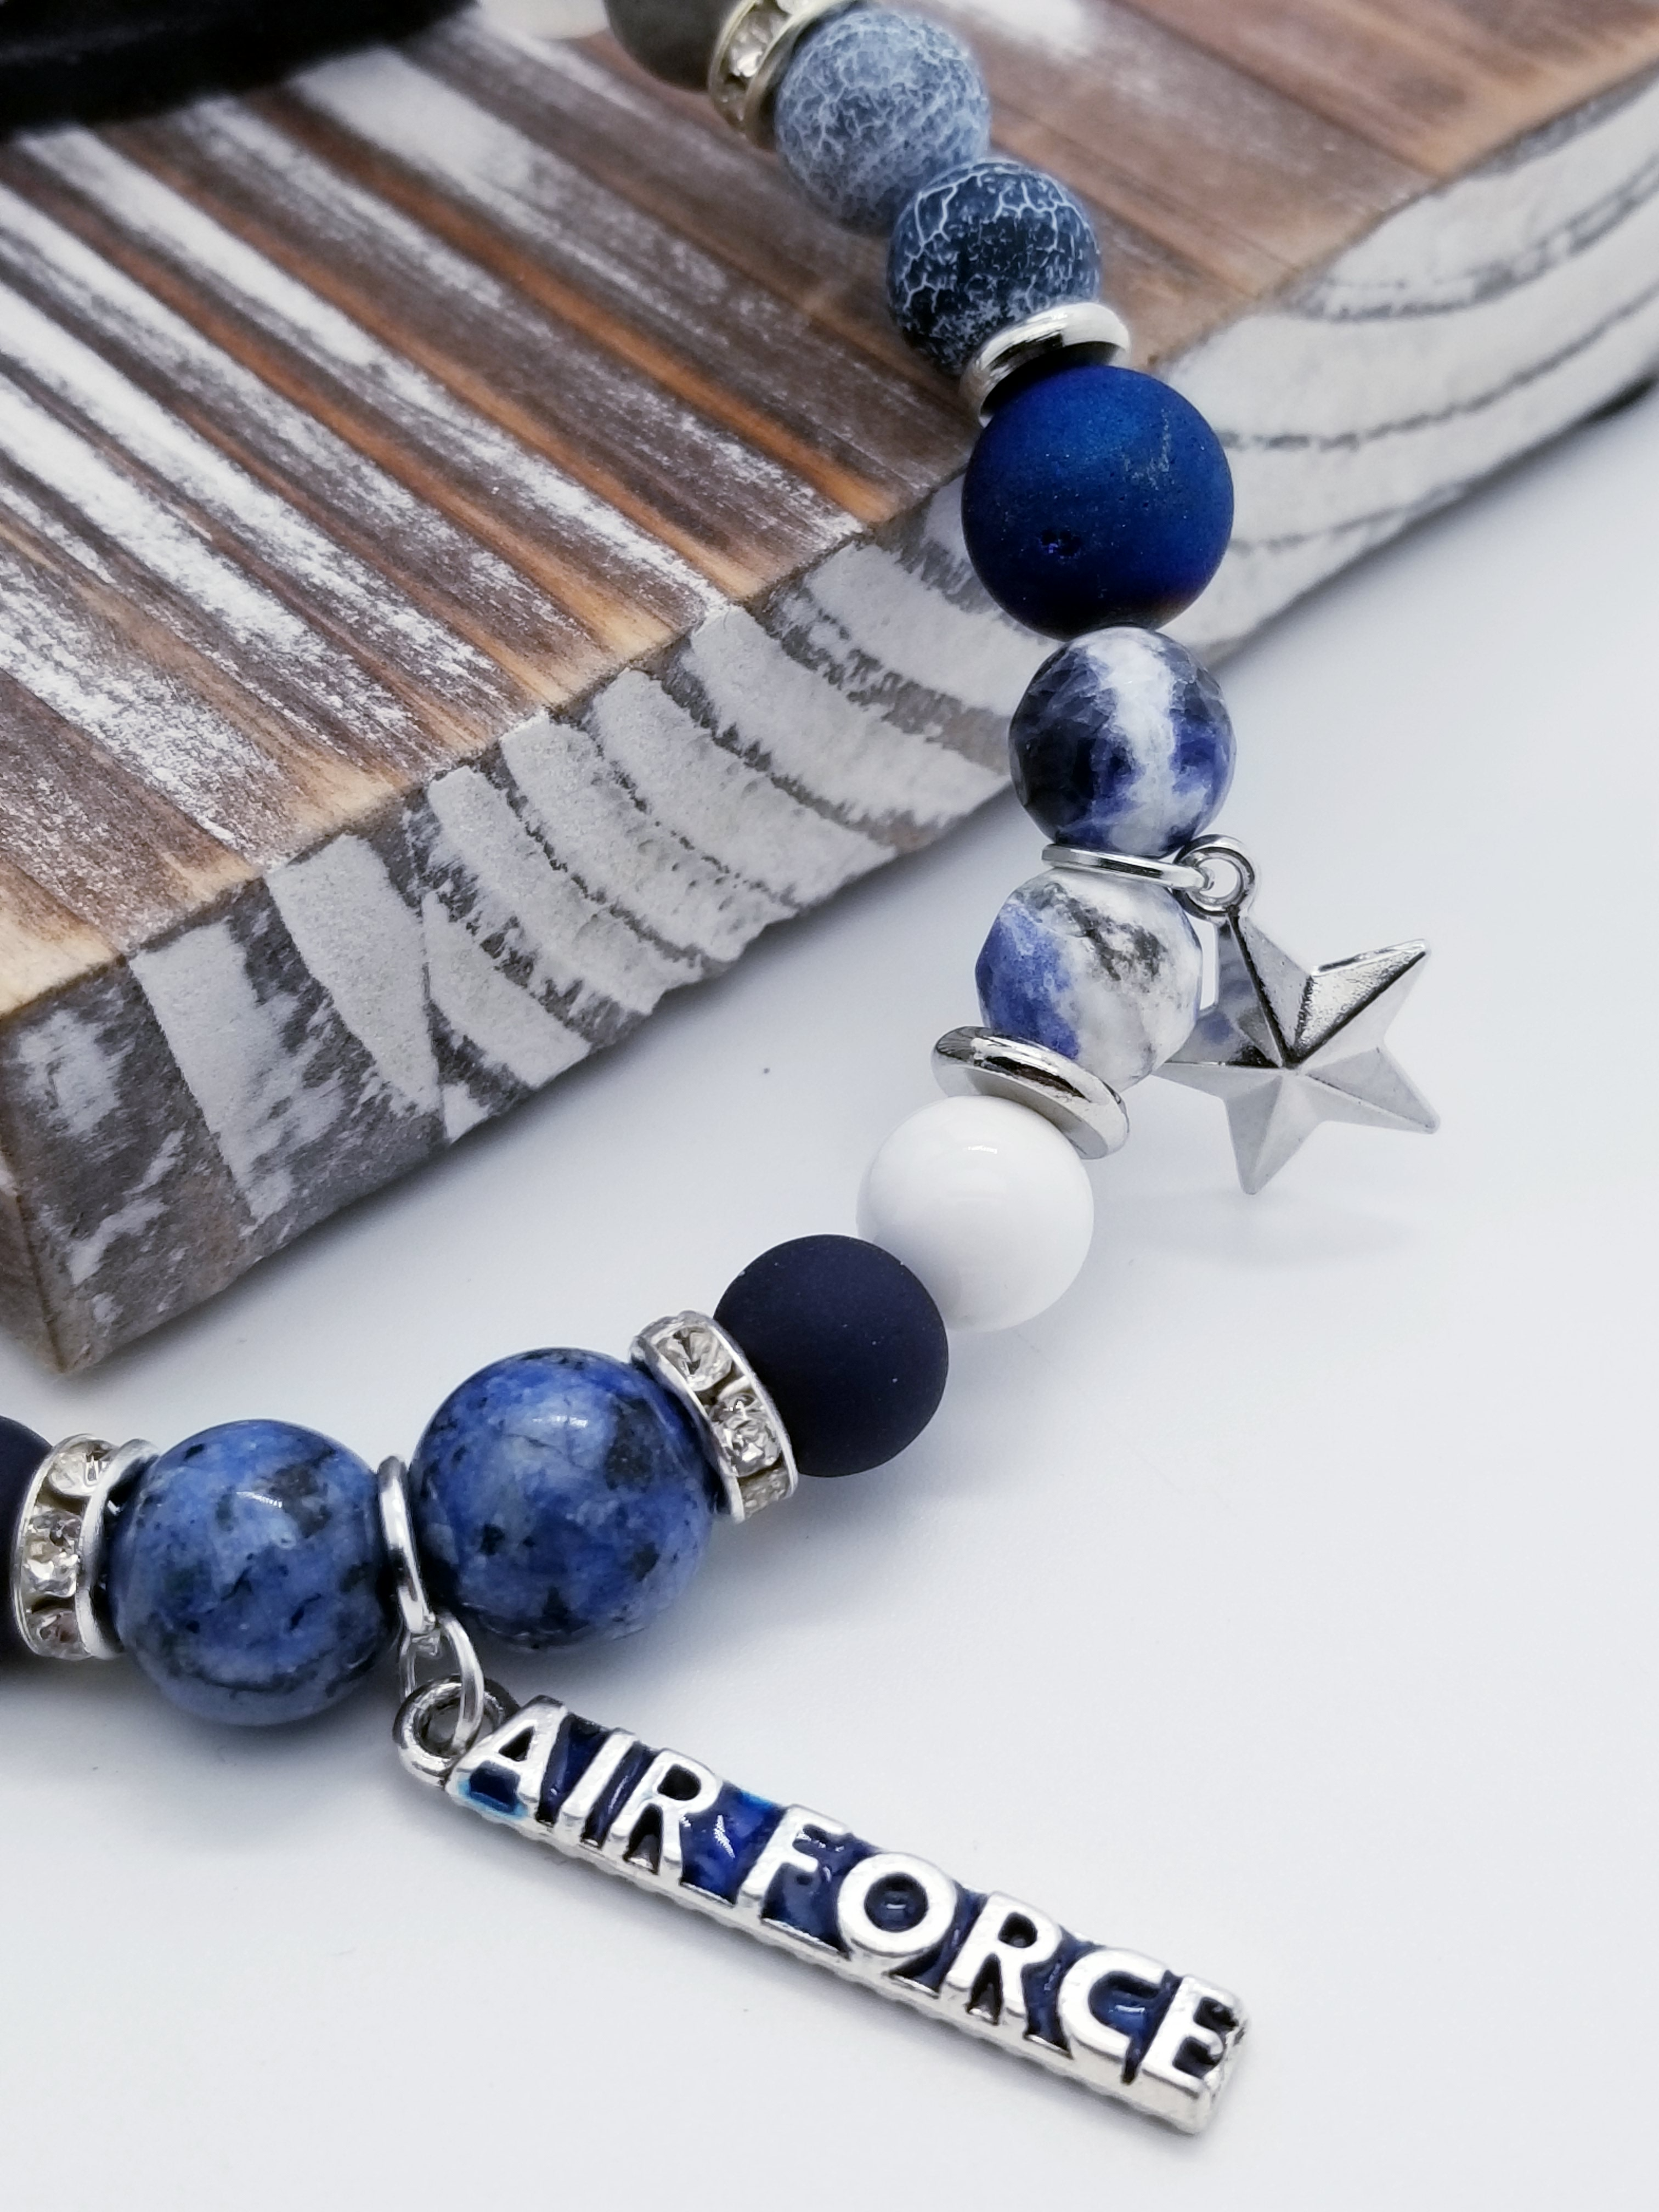 Integrity, Self Service, and Excellence (US Air Force core values) inspired bracelet to honor our troops, veterans, and the families that support them! "Air Force" and star charms with navy matte glass beads, white turquoise beads, indigo matte metallic beads, silver marbled glass beads, cracked navy and white glass beads, silver spacer beads, and grade A rondel (white rhinestone).